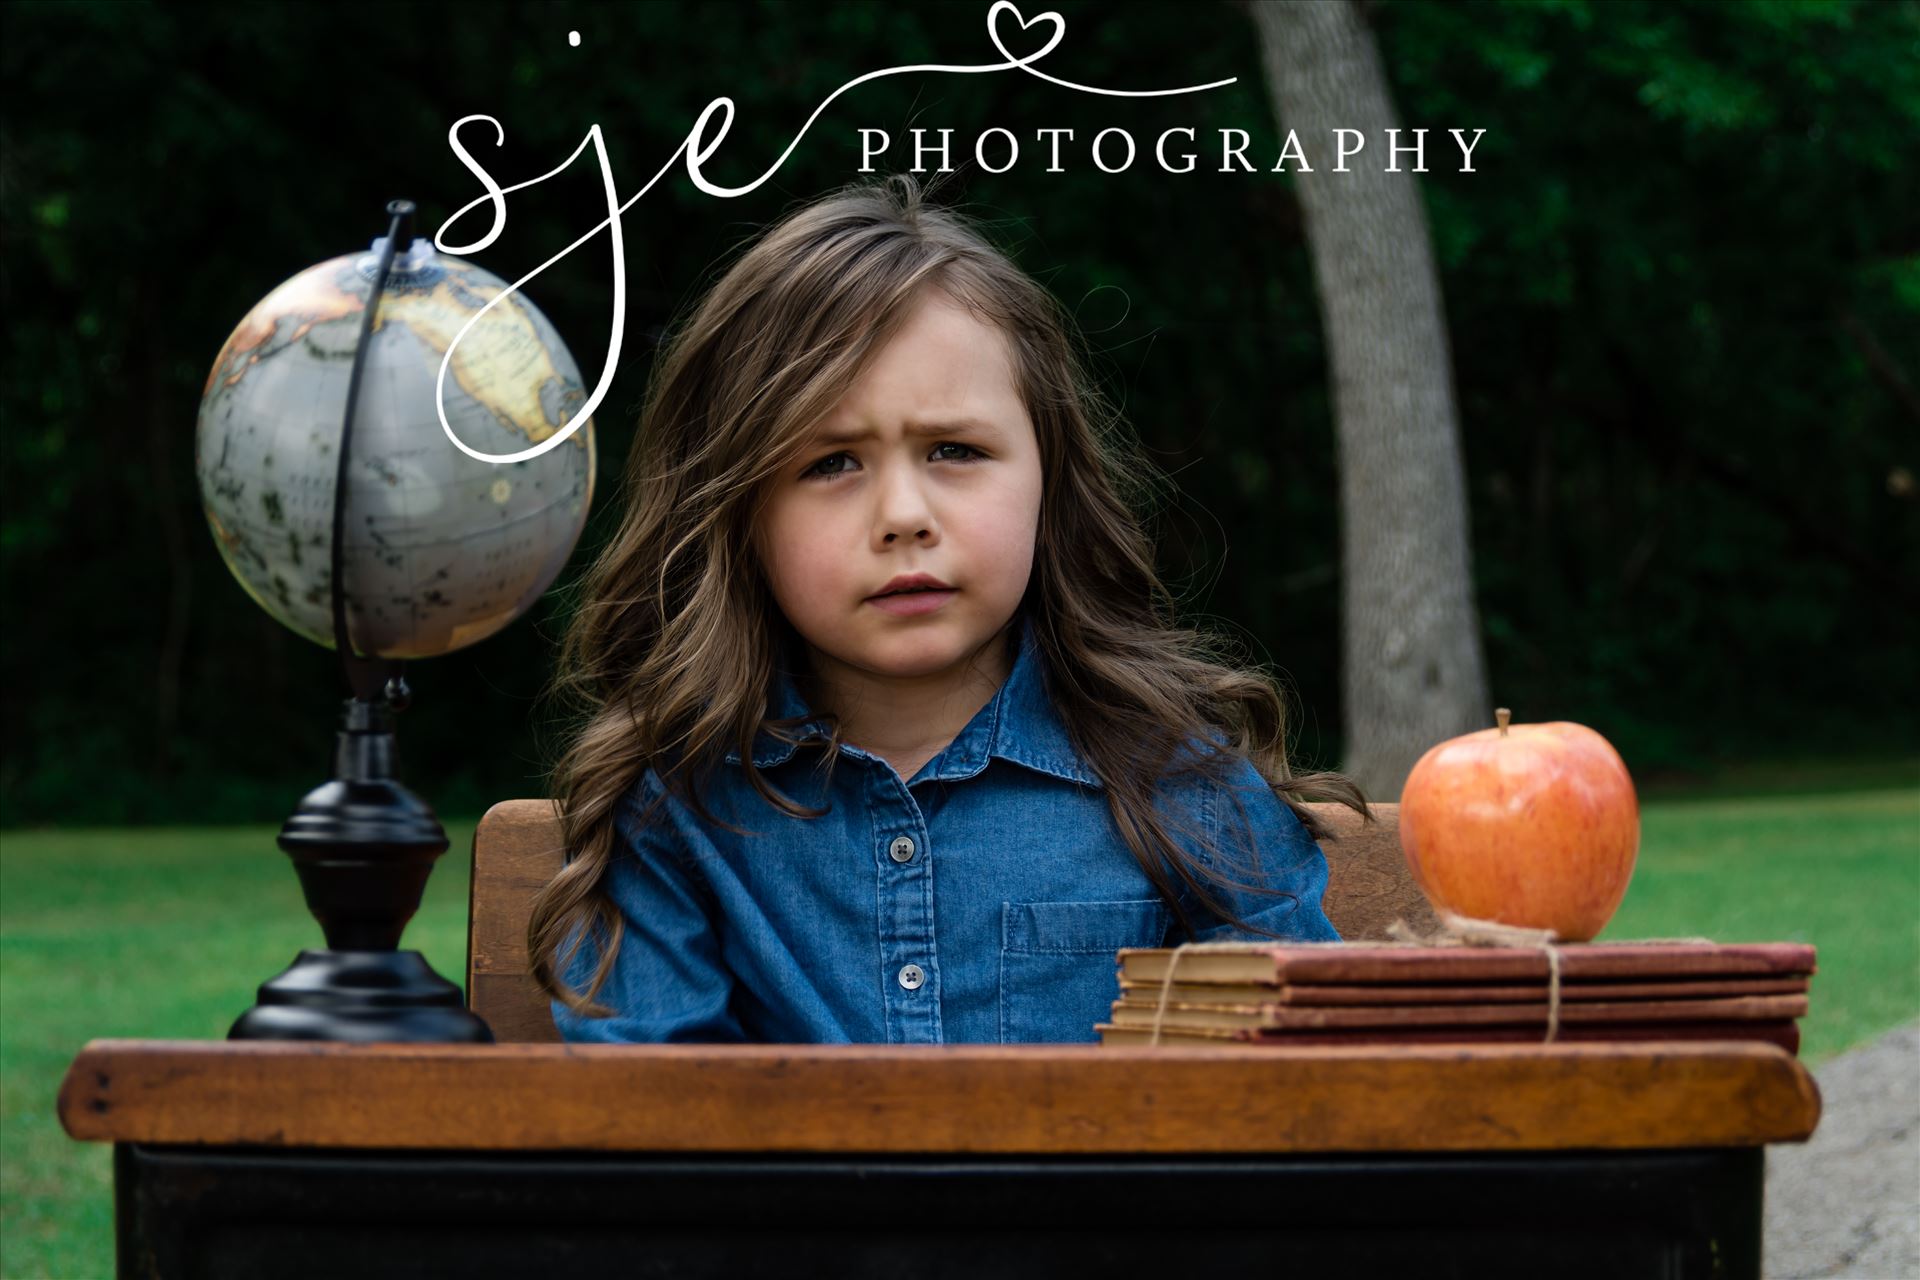 Paisley Baughn -  by SJE Photography